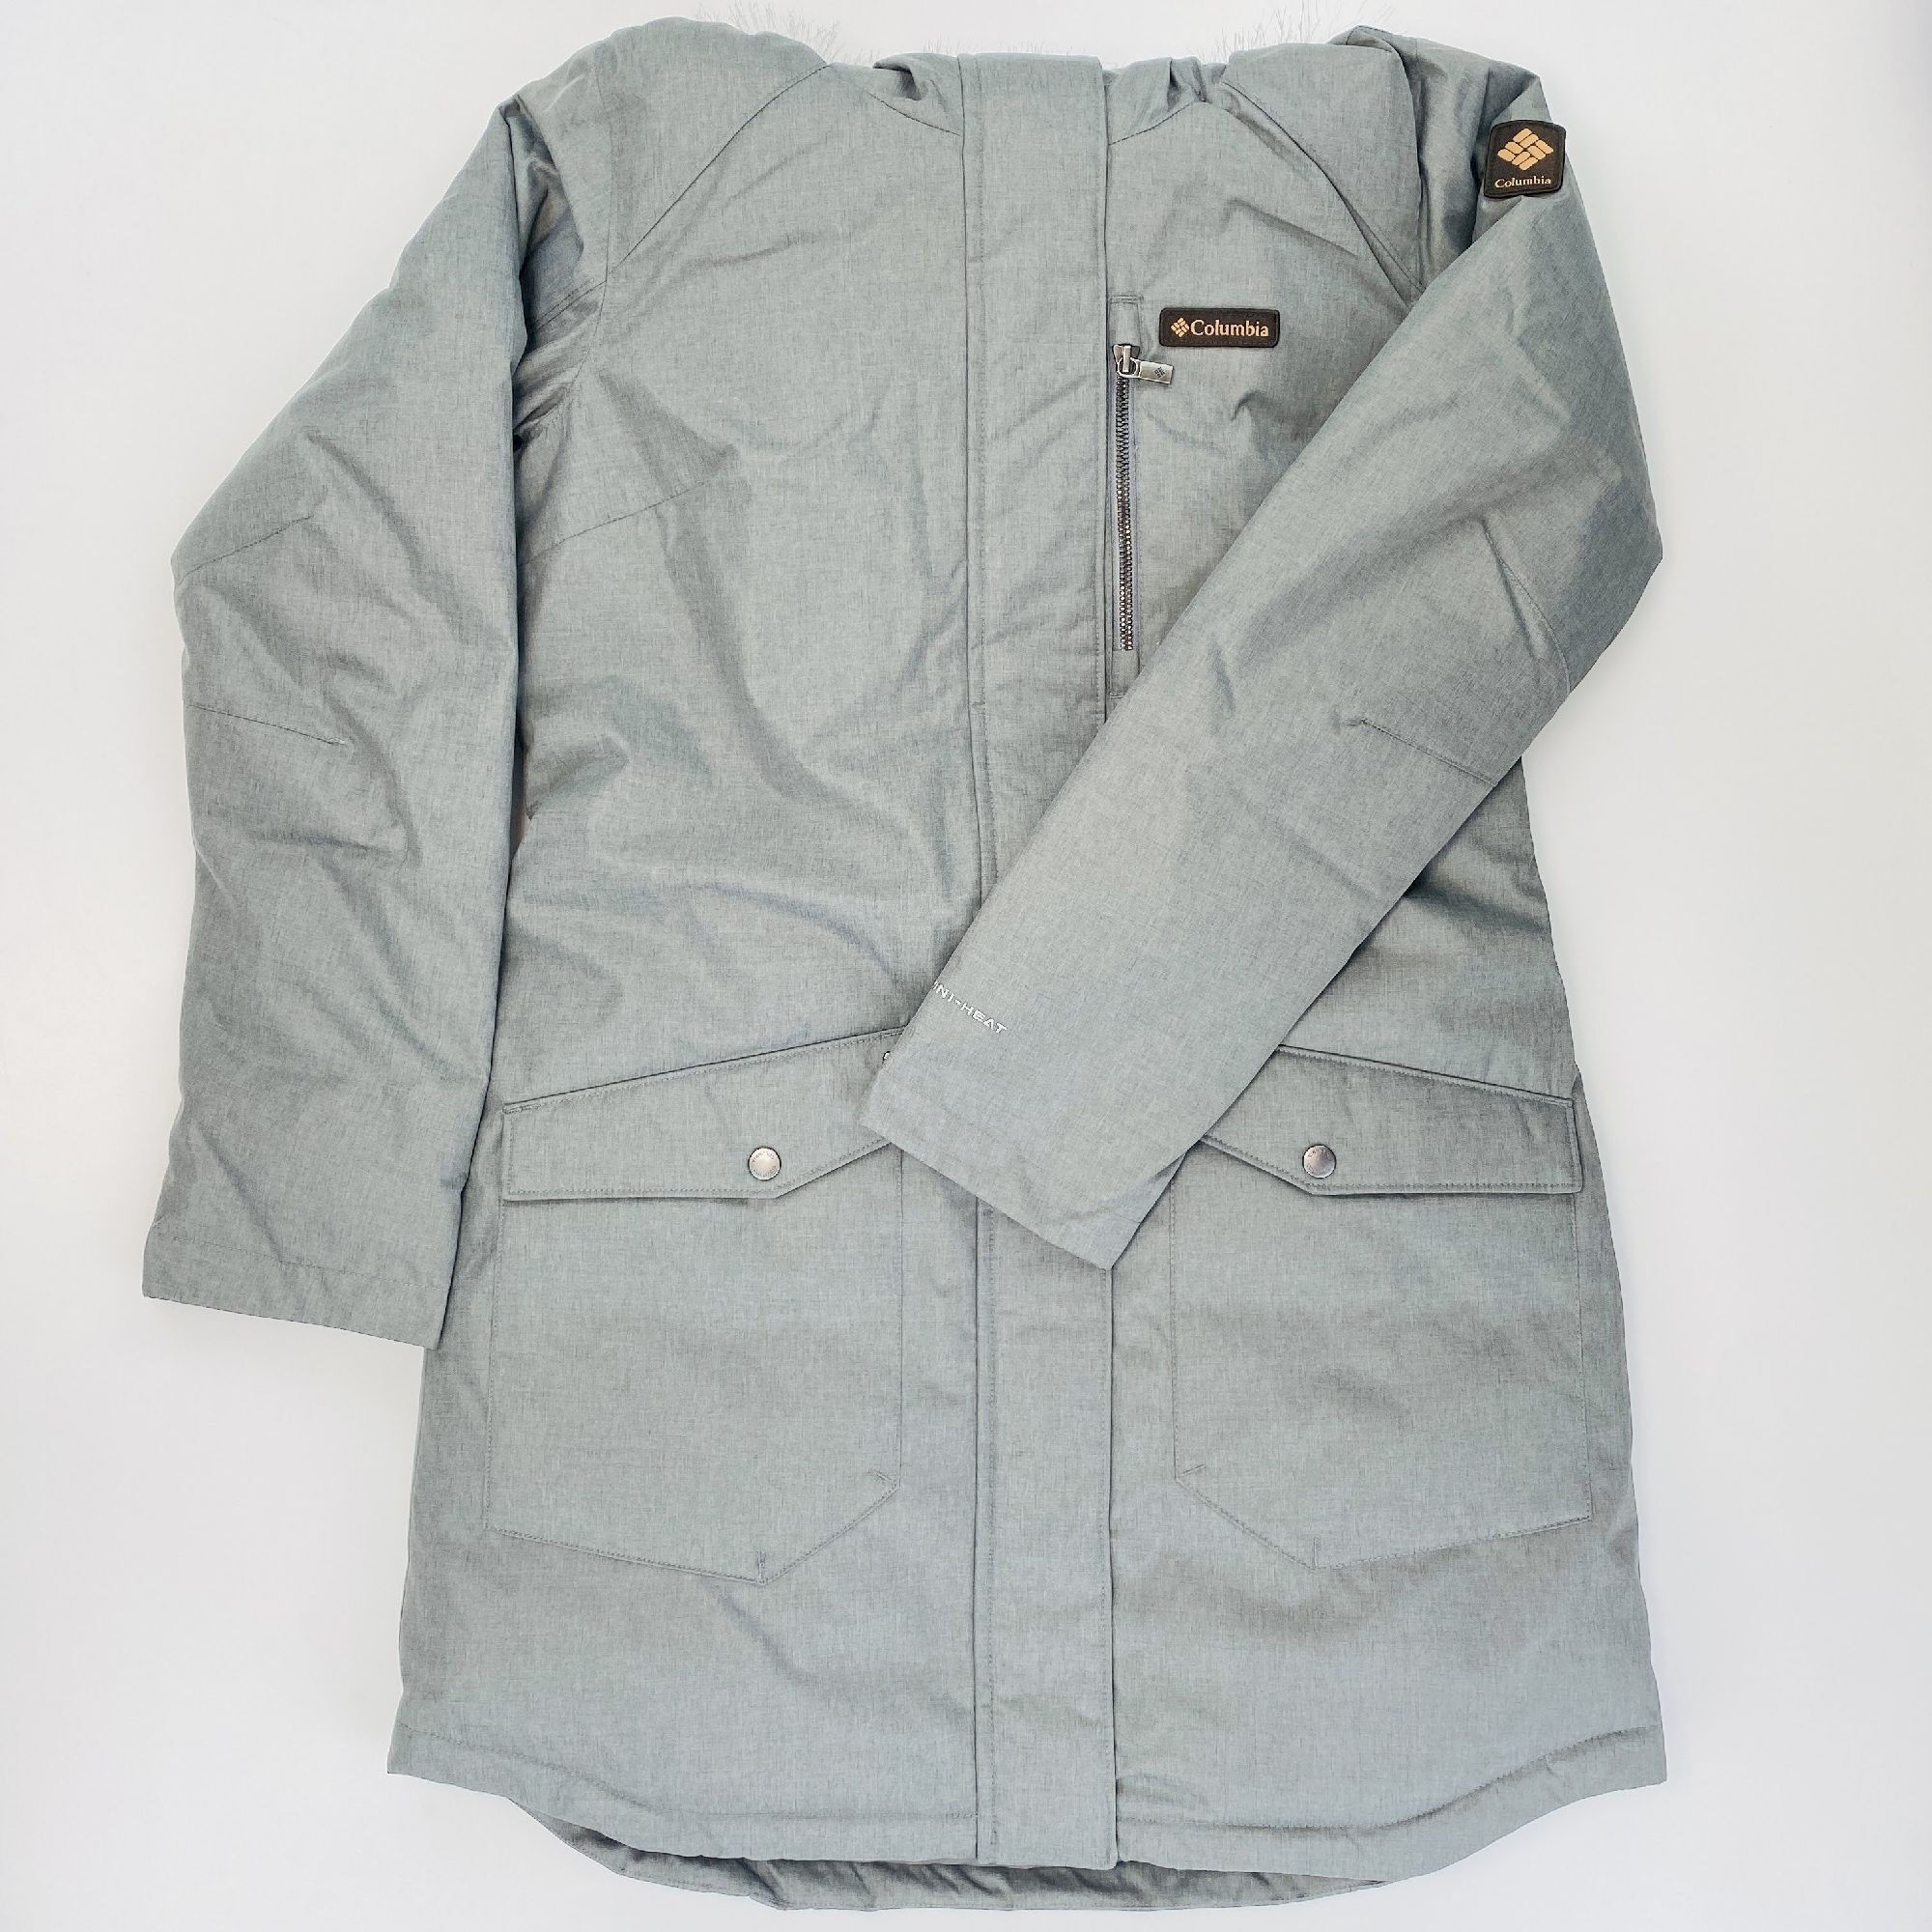 Columbia Suttle Mountain™ Long Insulated Jacket - Seconde main Parka femme - Gris - M | Hardloop